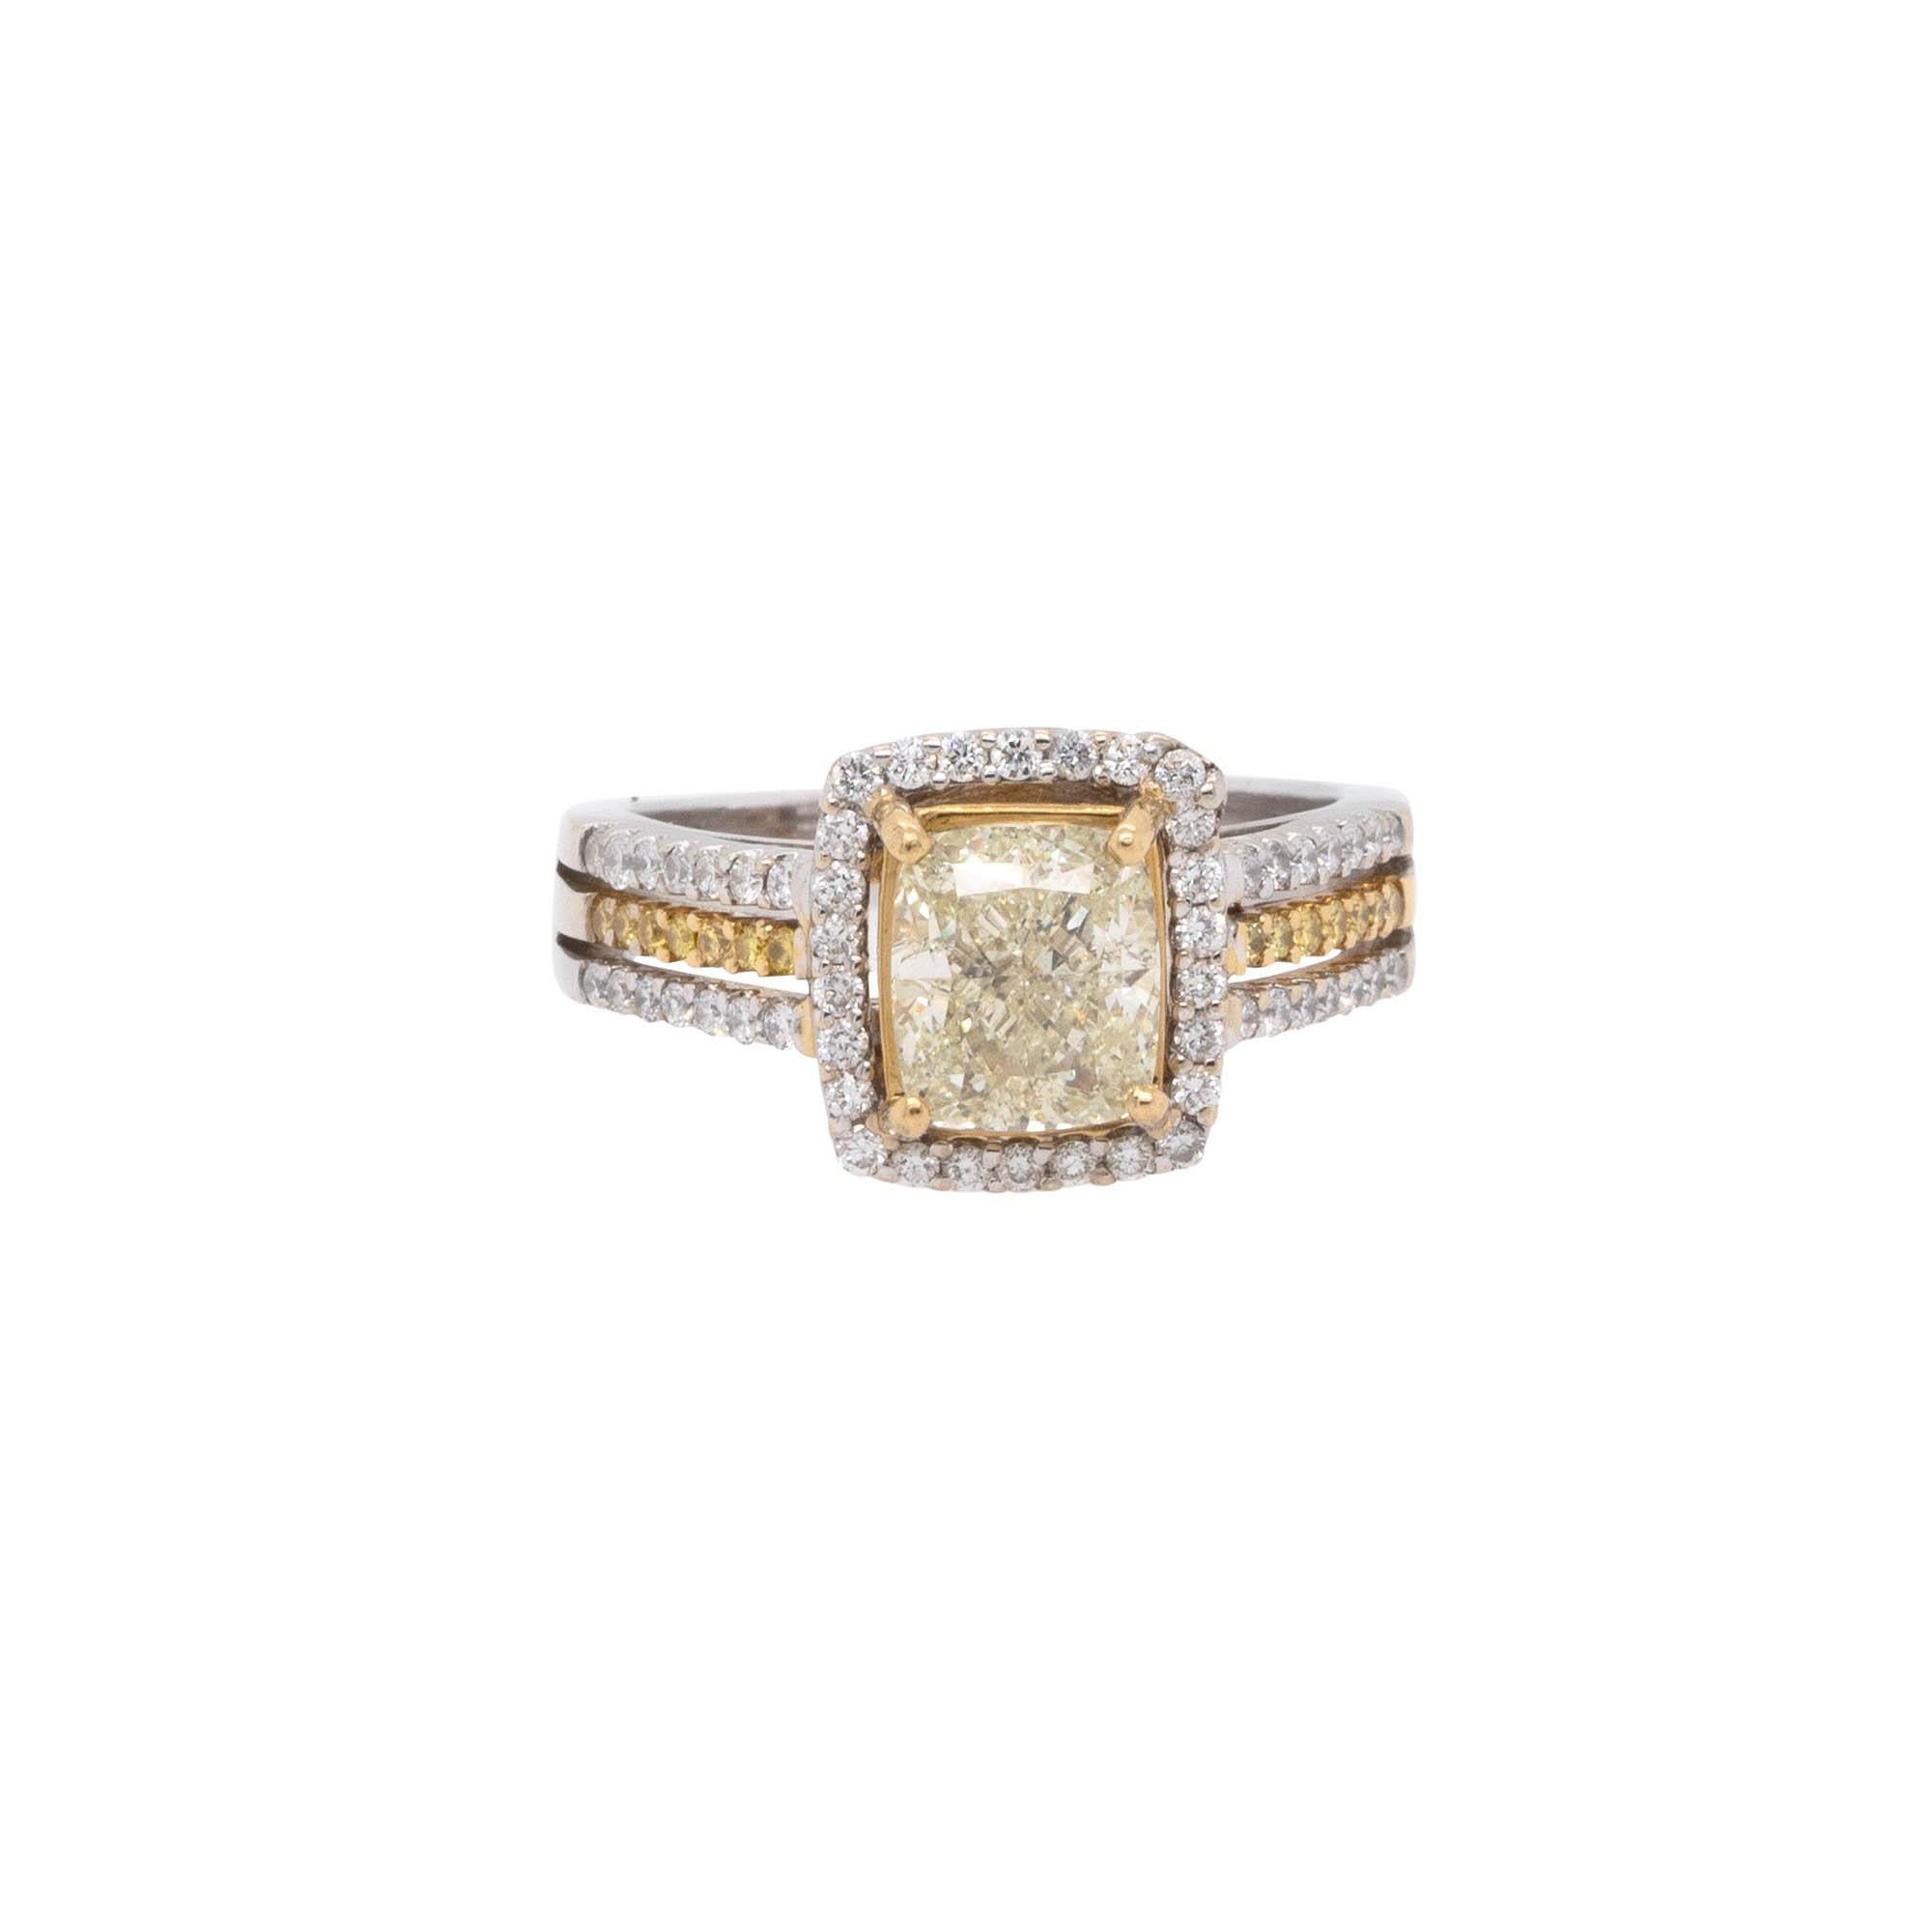 This is a fancy yellow diamond ring made of 14k white and yellow gold, with a total weight of 6.5g. It features a 2.03ct natural cushion cut diamond, surrounded by 1.00ctw of round cut natural diamonds. The ring measures 21mm x 11mm x 25.5mm and